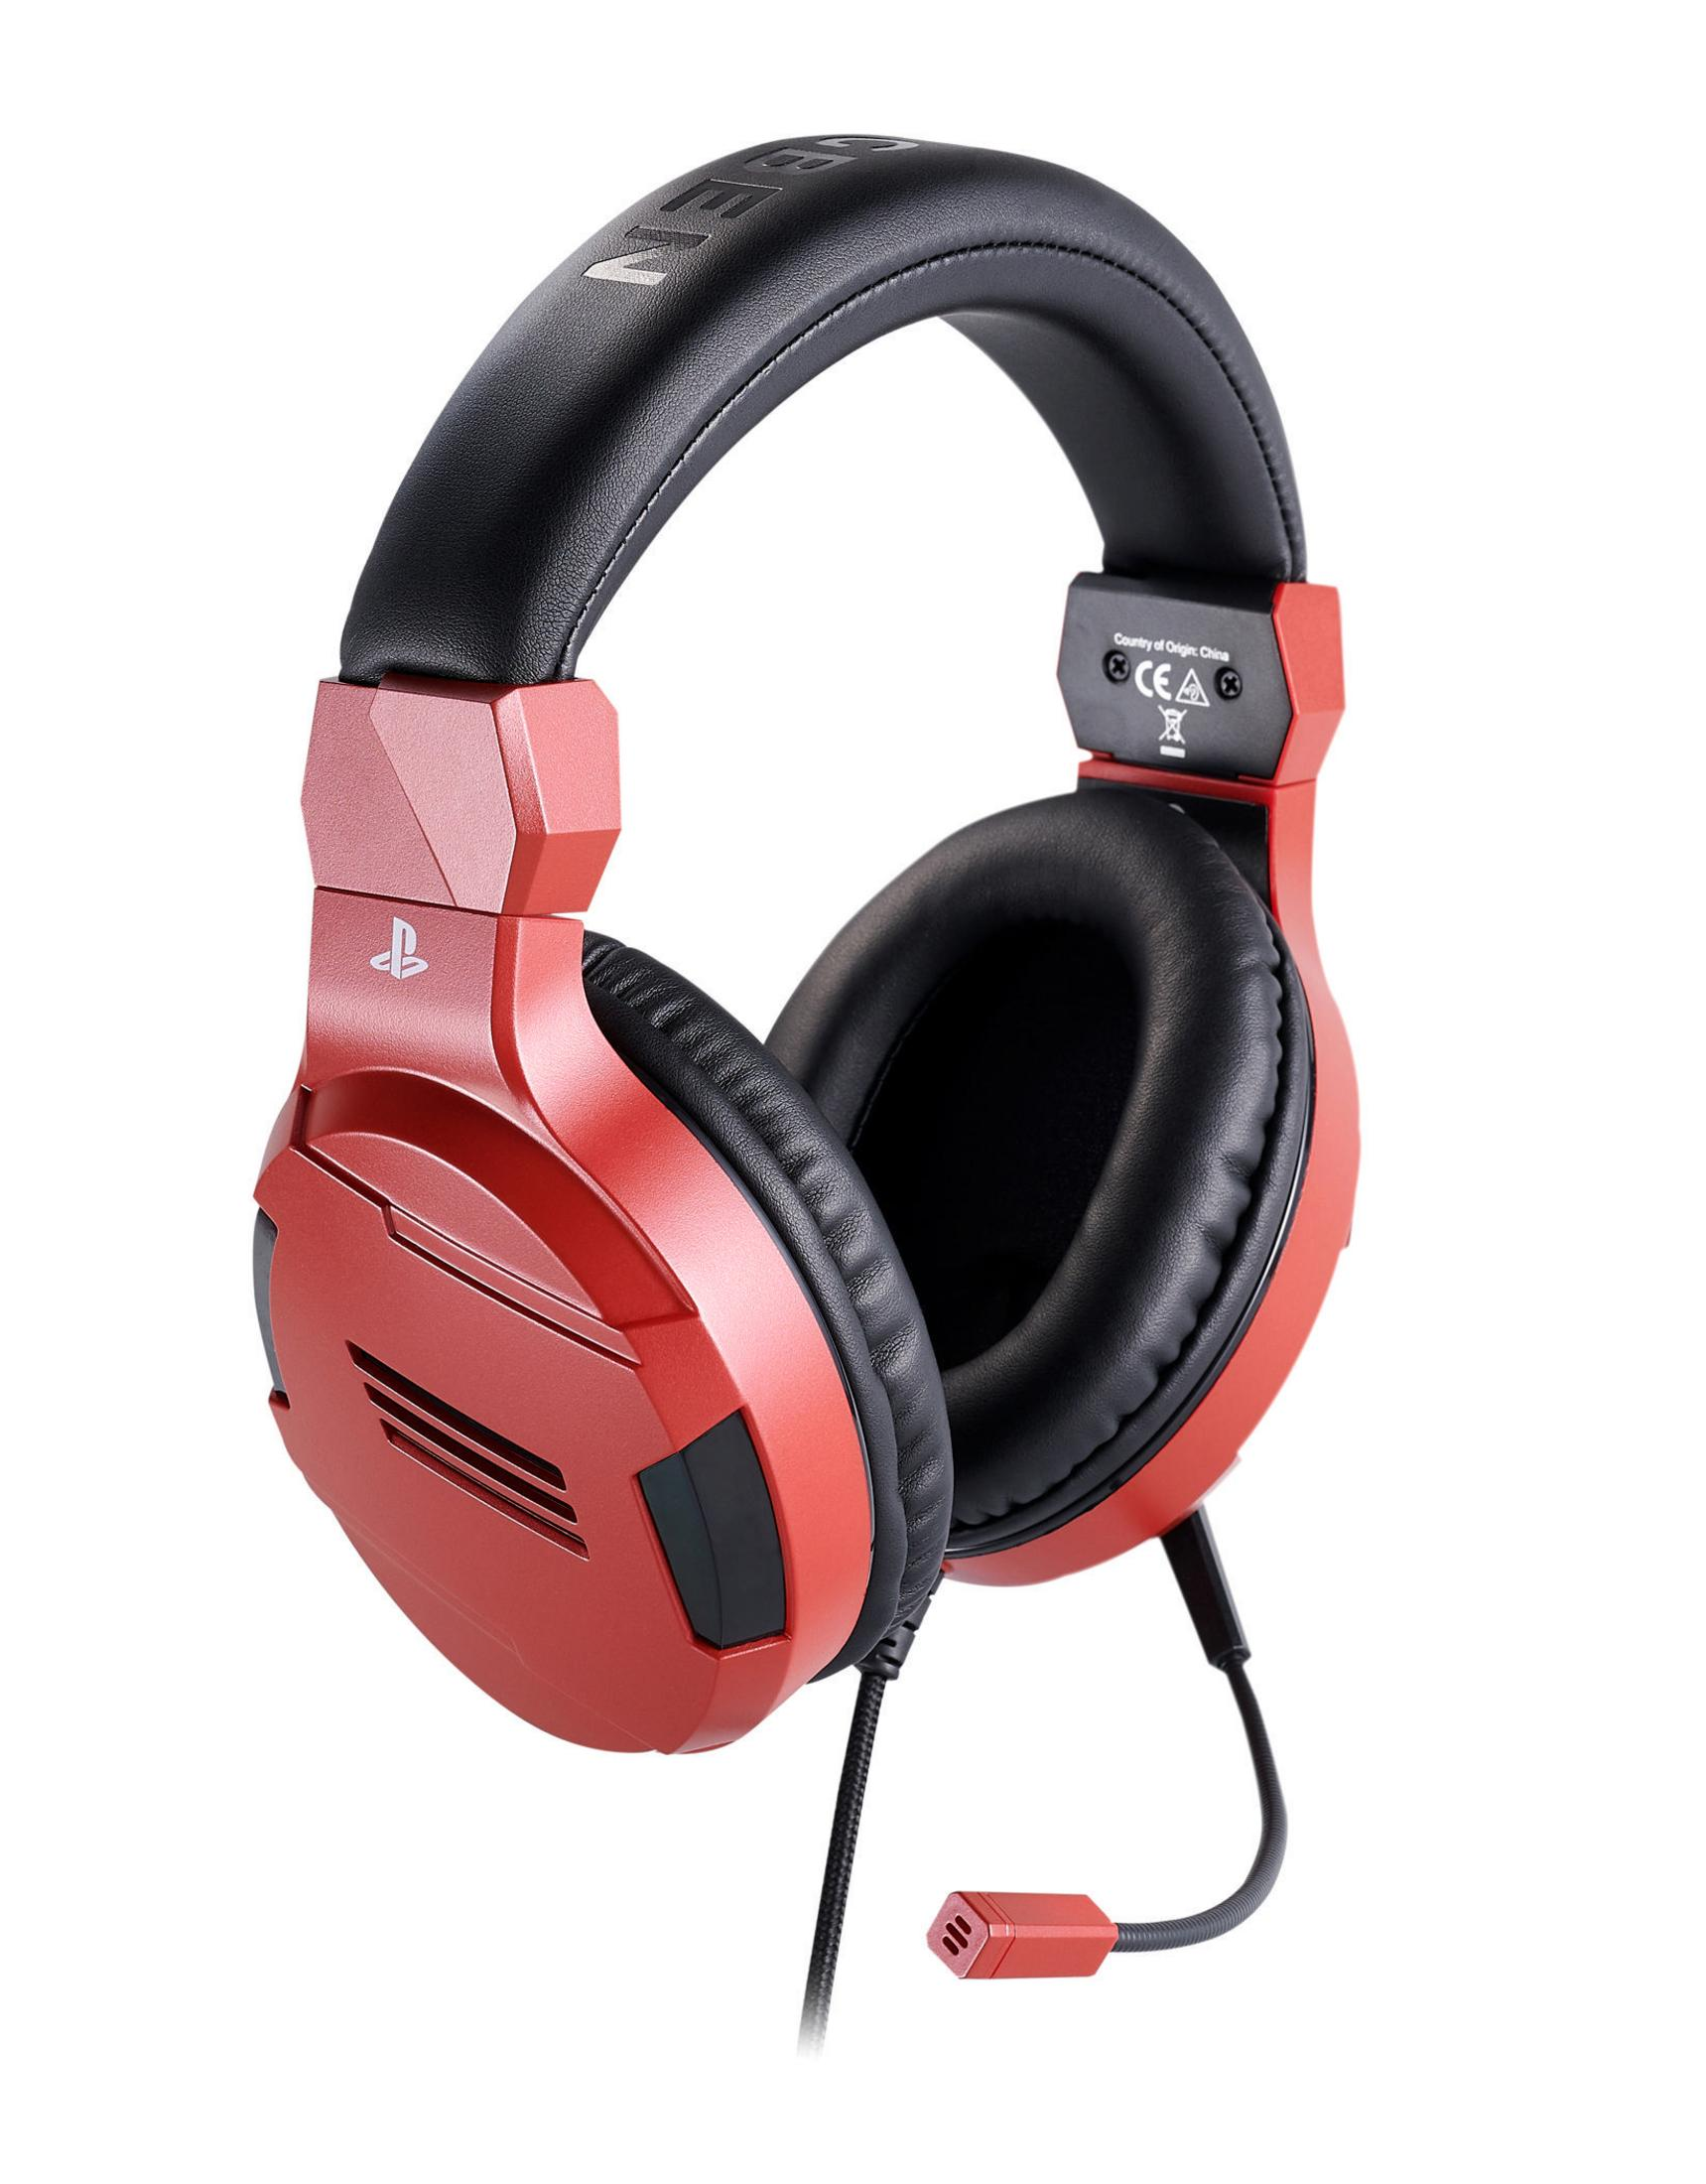 STEREO-HEADSET RED Headset V3 PLAYST, Rot/Schwarz NACON PS4 Gaming Over-ear